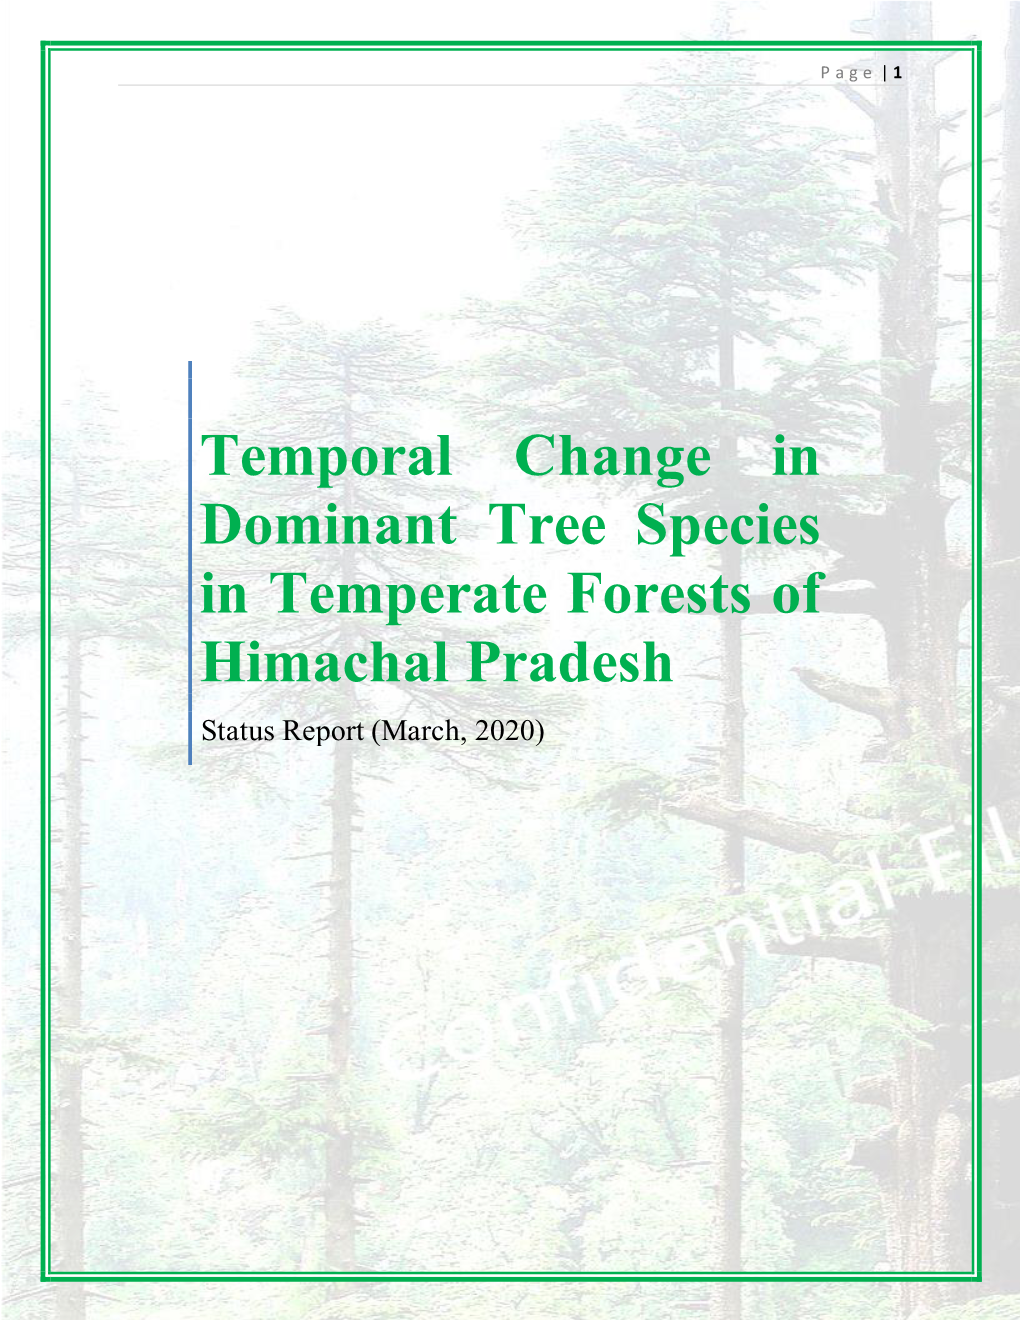 Temporal Change in Dominant Tree Species in Temperate Forests of Himachal Pradesh Status Report (March, 2020)